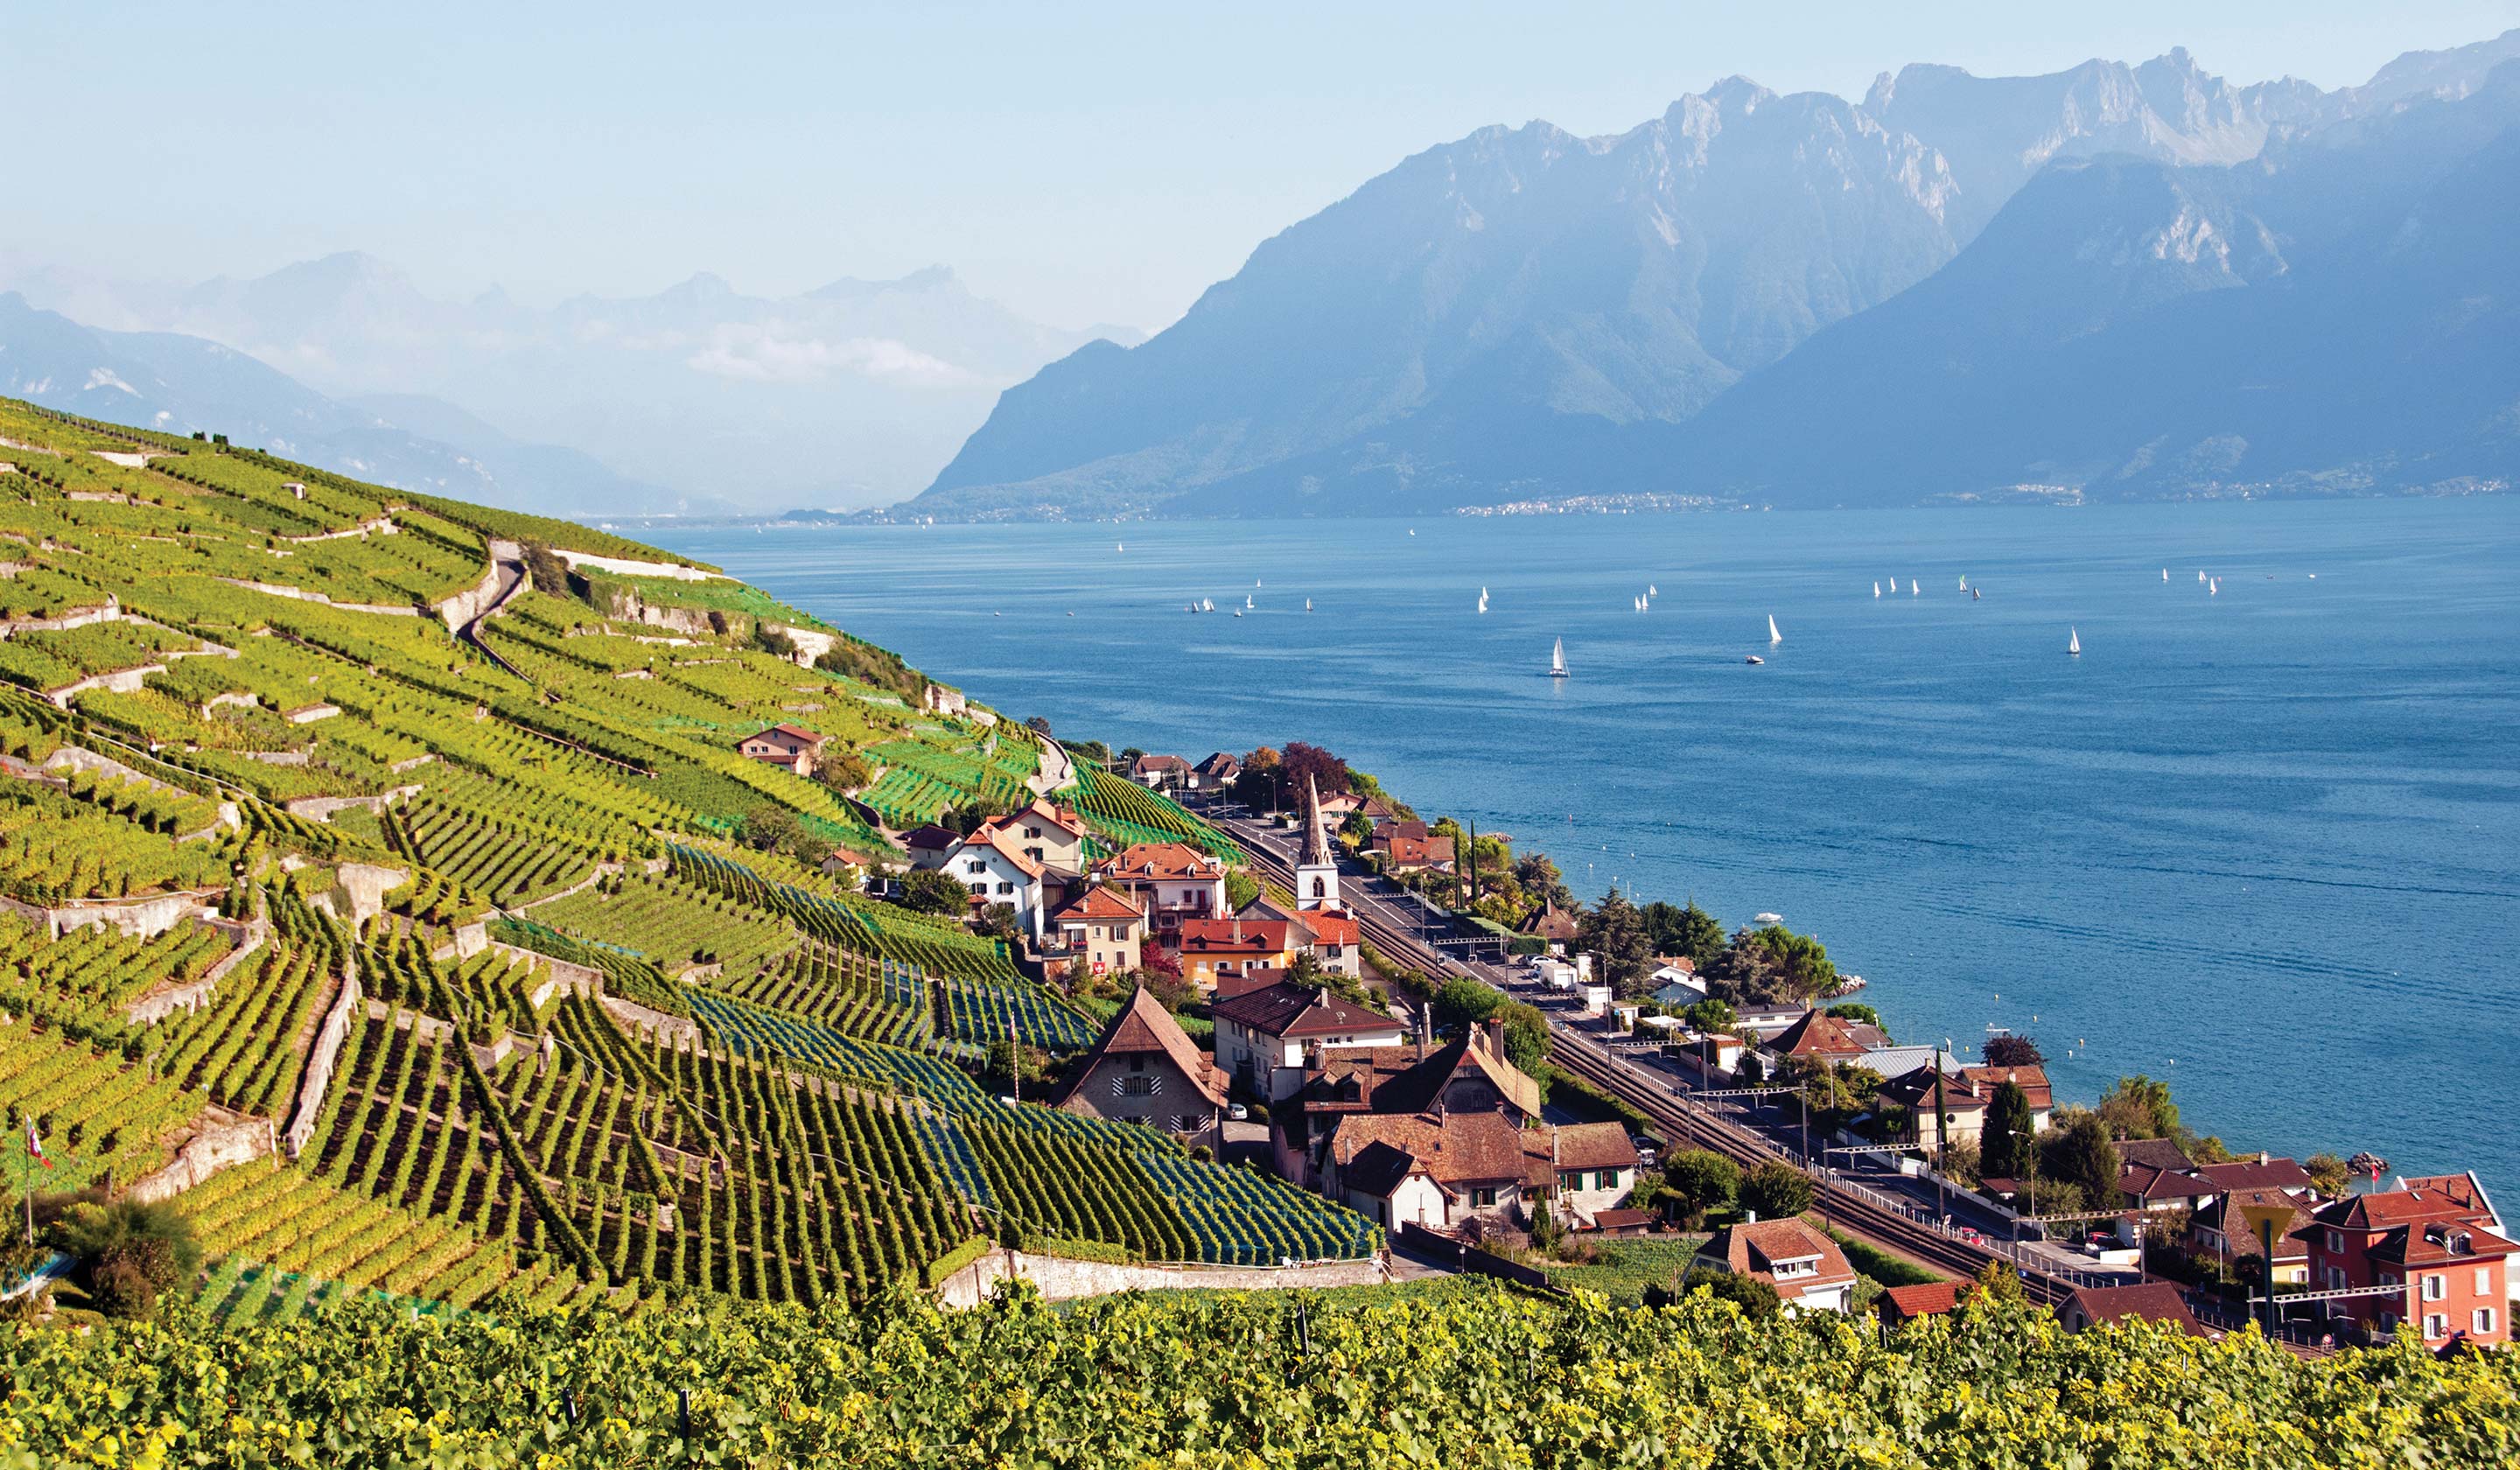 Rhine Connoisseur: Brussels to Montreux - Southbound